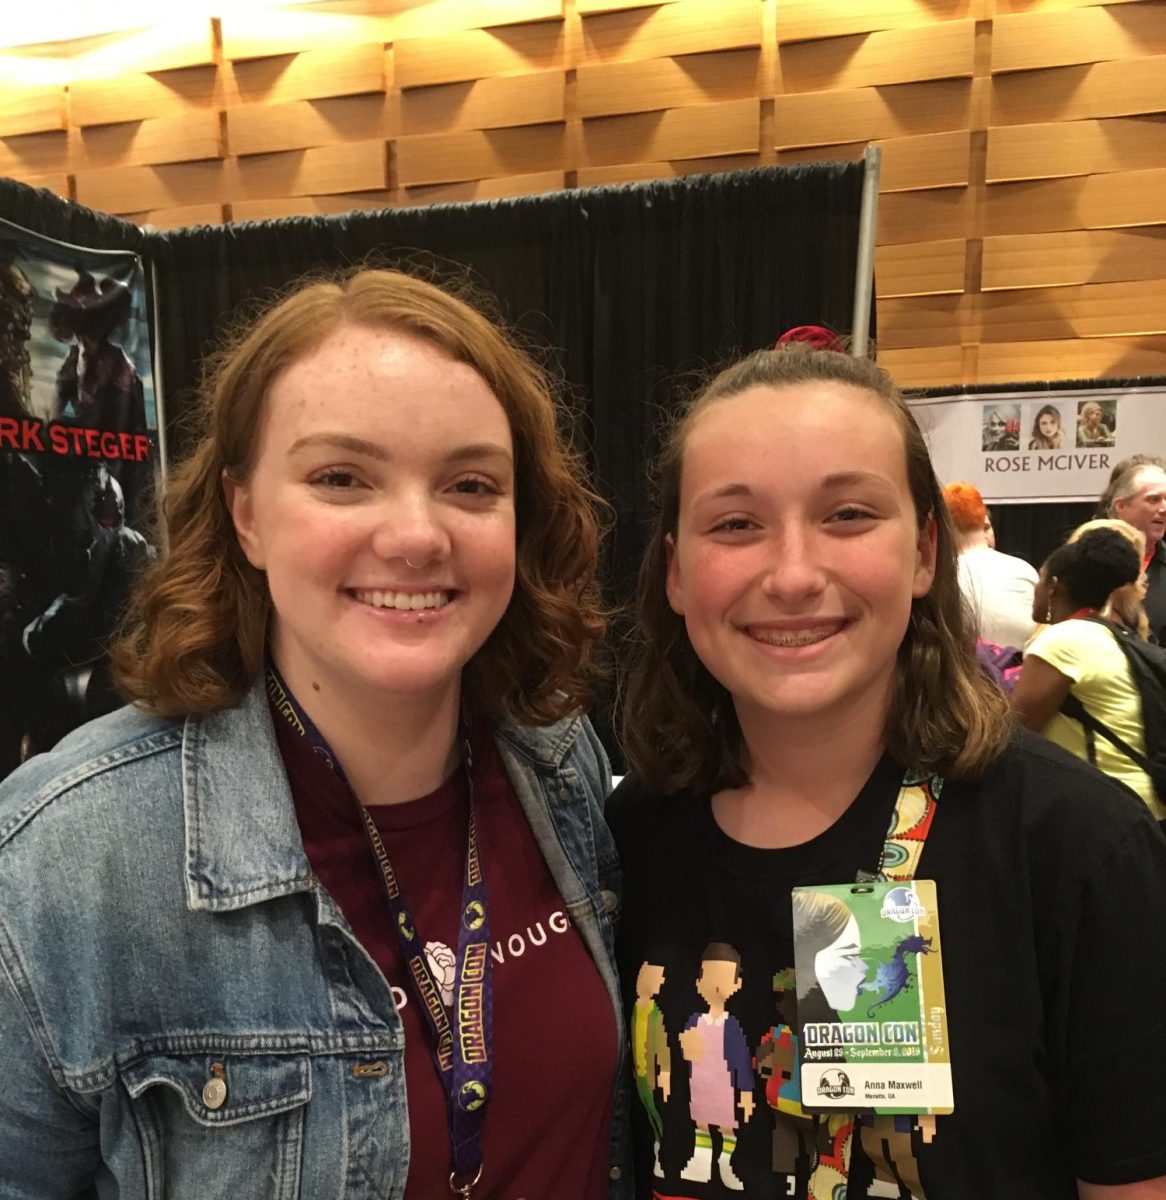 Anna Maxwell with Shannon Purser from Stranger Things, one of her frequent rewatched shows, during Dragon Con in 2019.